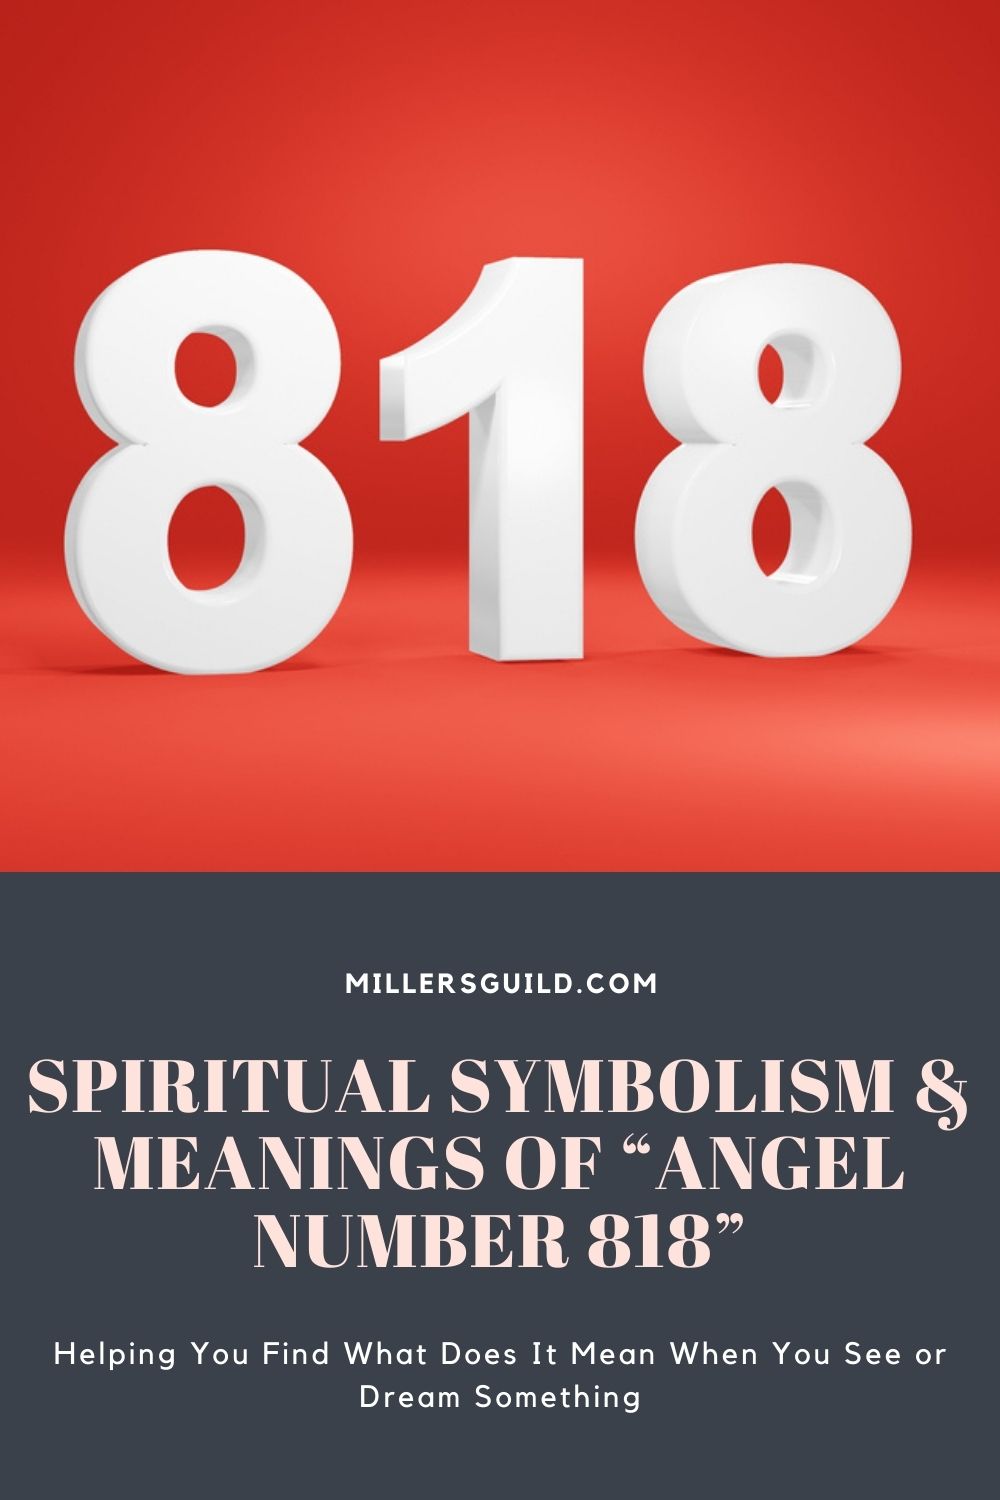 Spiritual Symbolism & Meanings of “Angel Number 818” 2